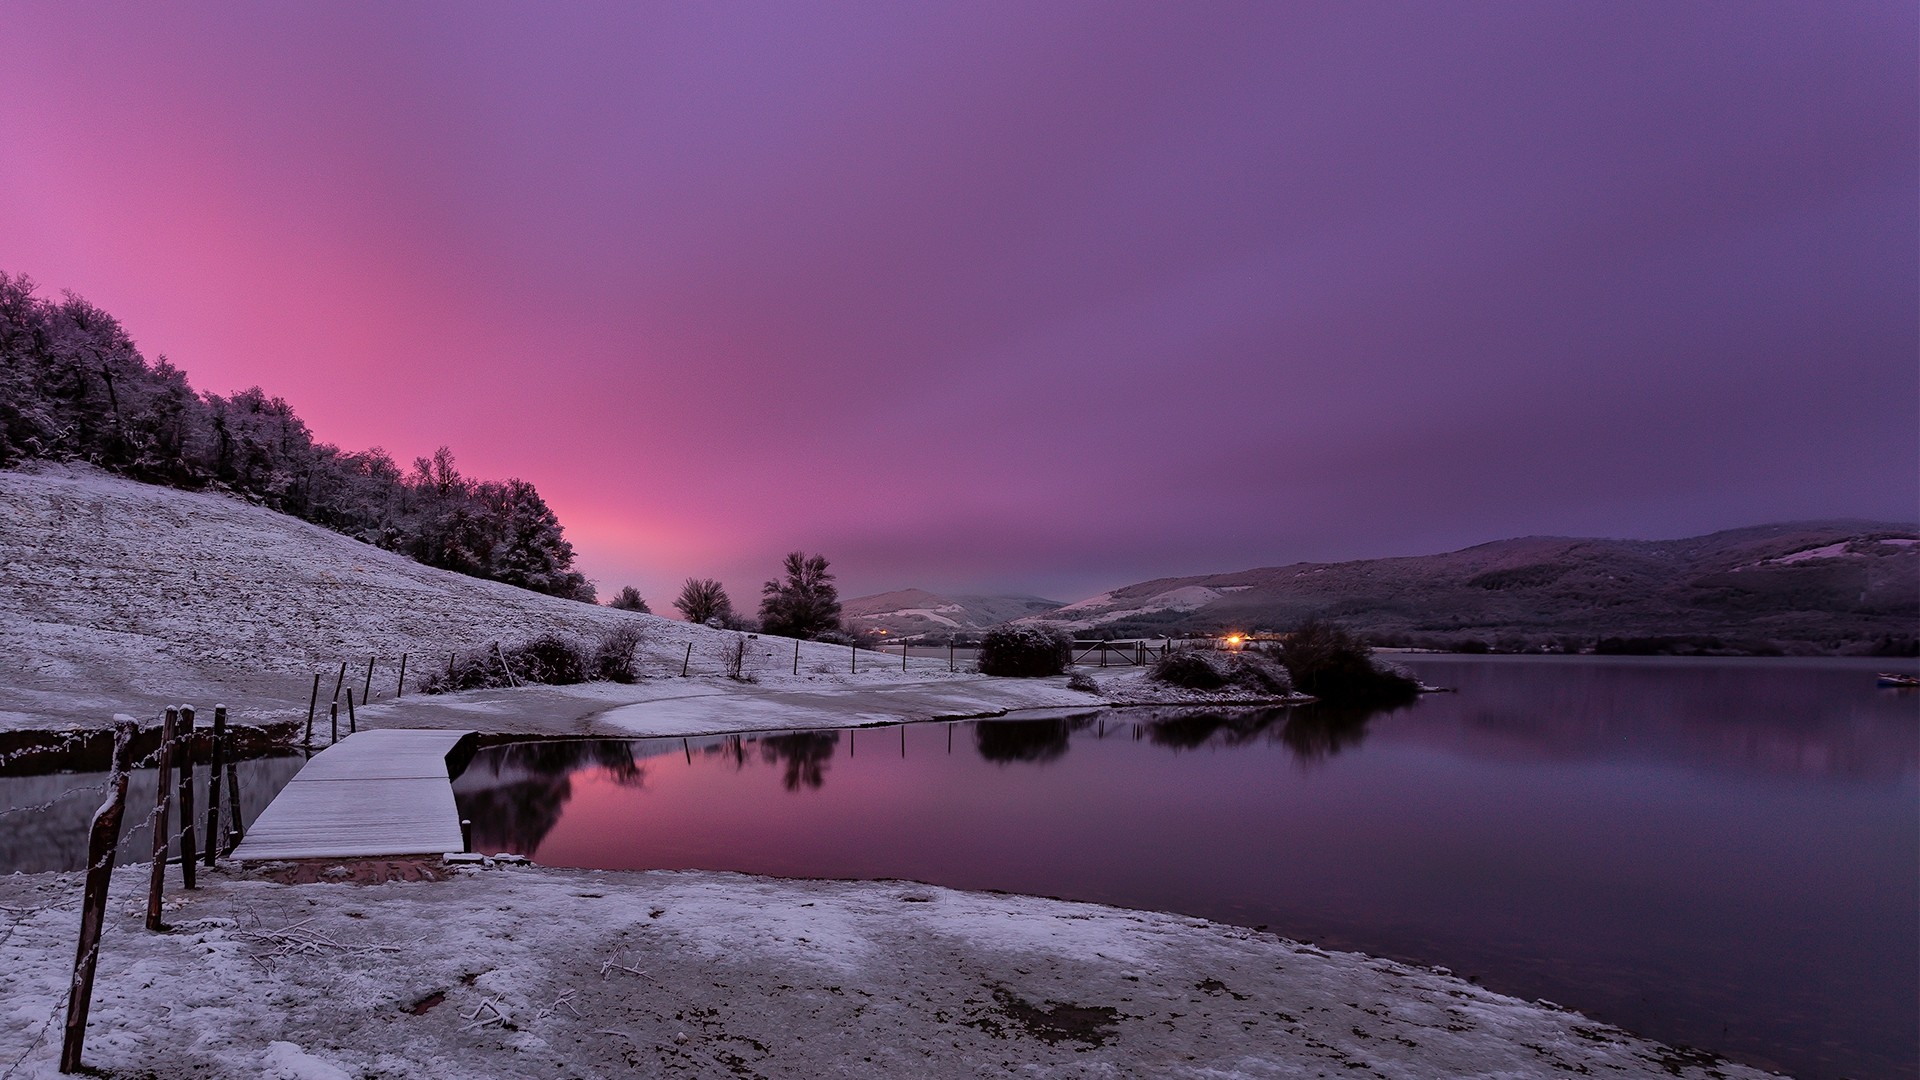 Wallpaper, trees, landscape, lights, sunset, night, lake, water, nature, reflection, snow, winter, long exposure, clouds, sunrise, ice, hills, evening, morning, mist, frost, fence, dusk, Aurora, cloud, mountain, weather, dawn, season, loch